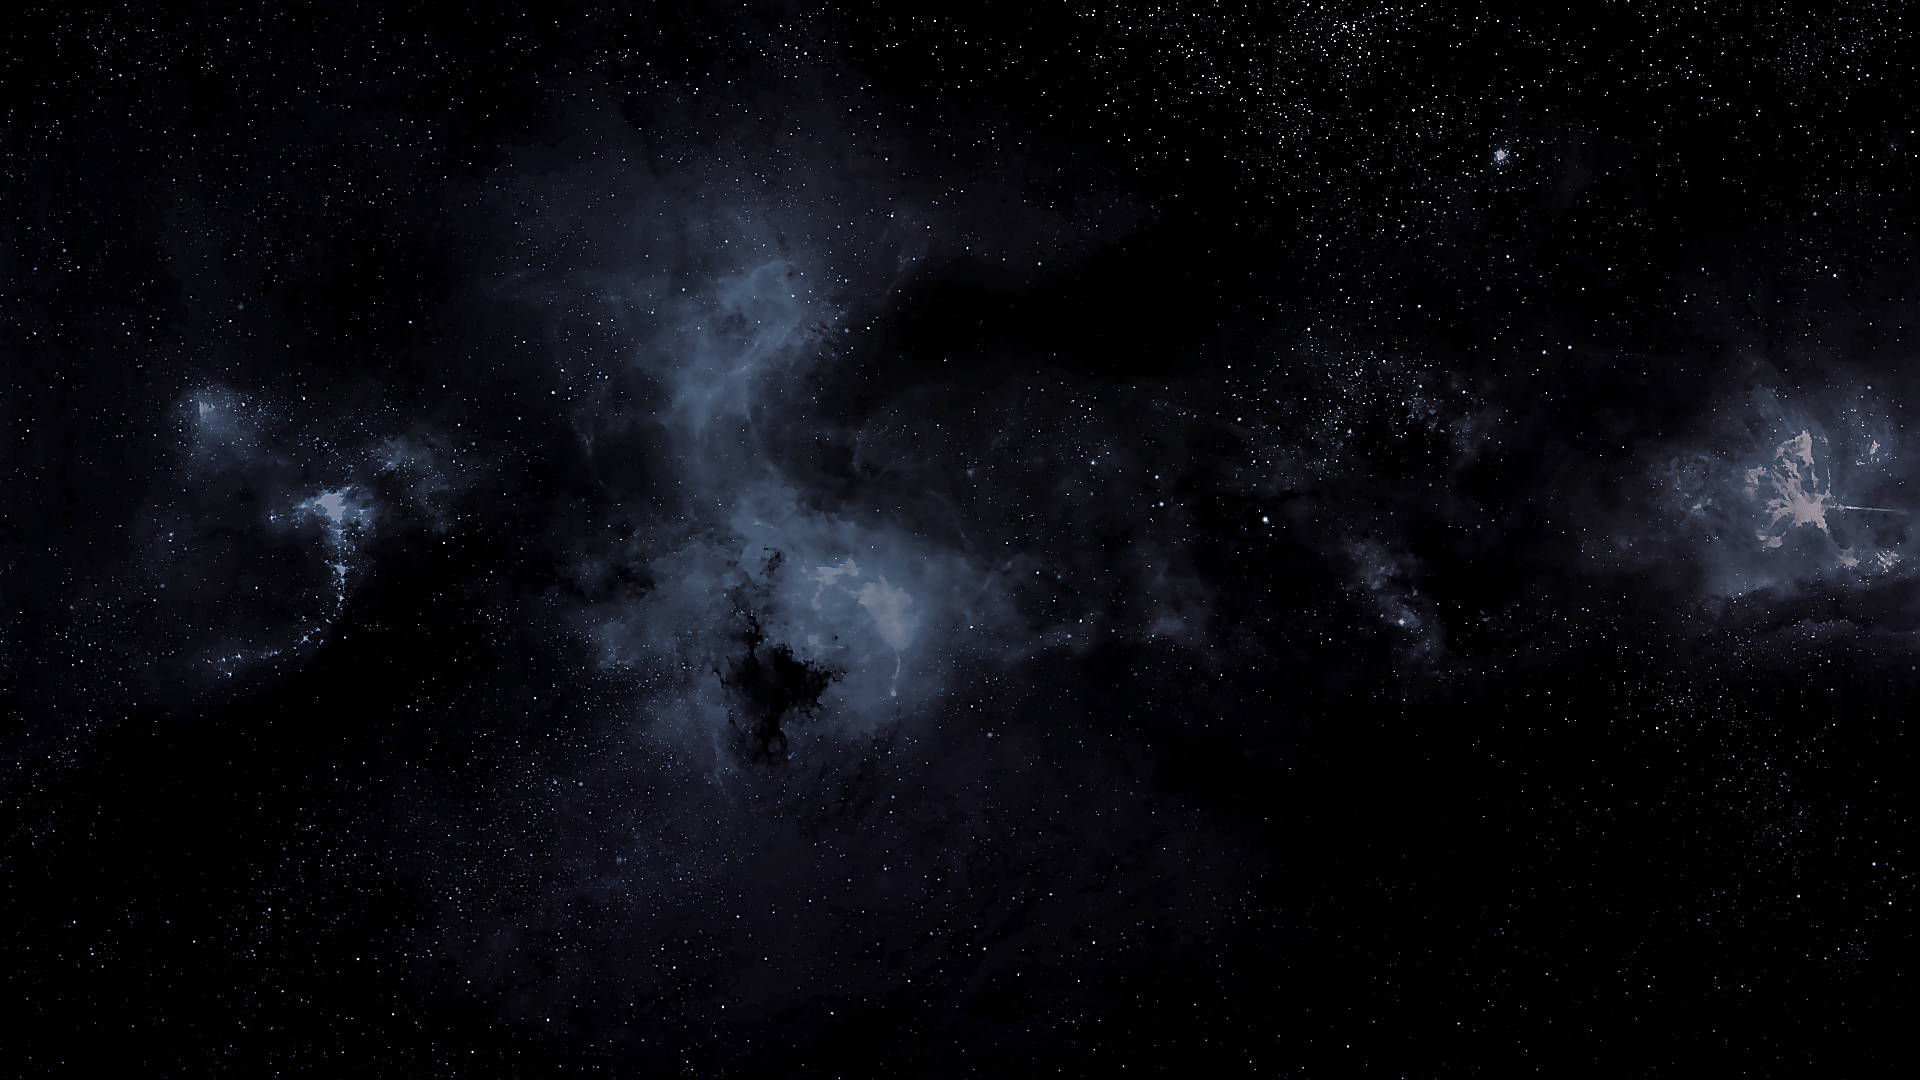 Pure Black Galaxy And Star Clusters Wallpaper